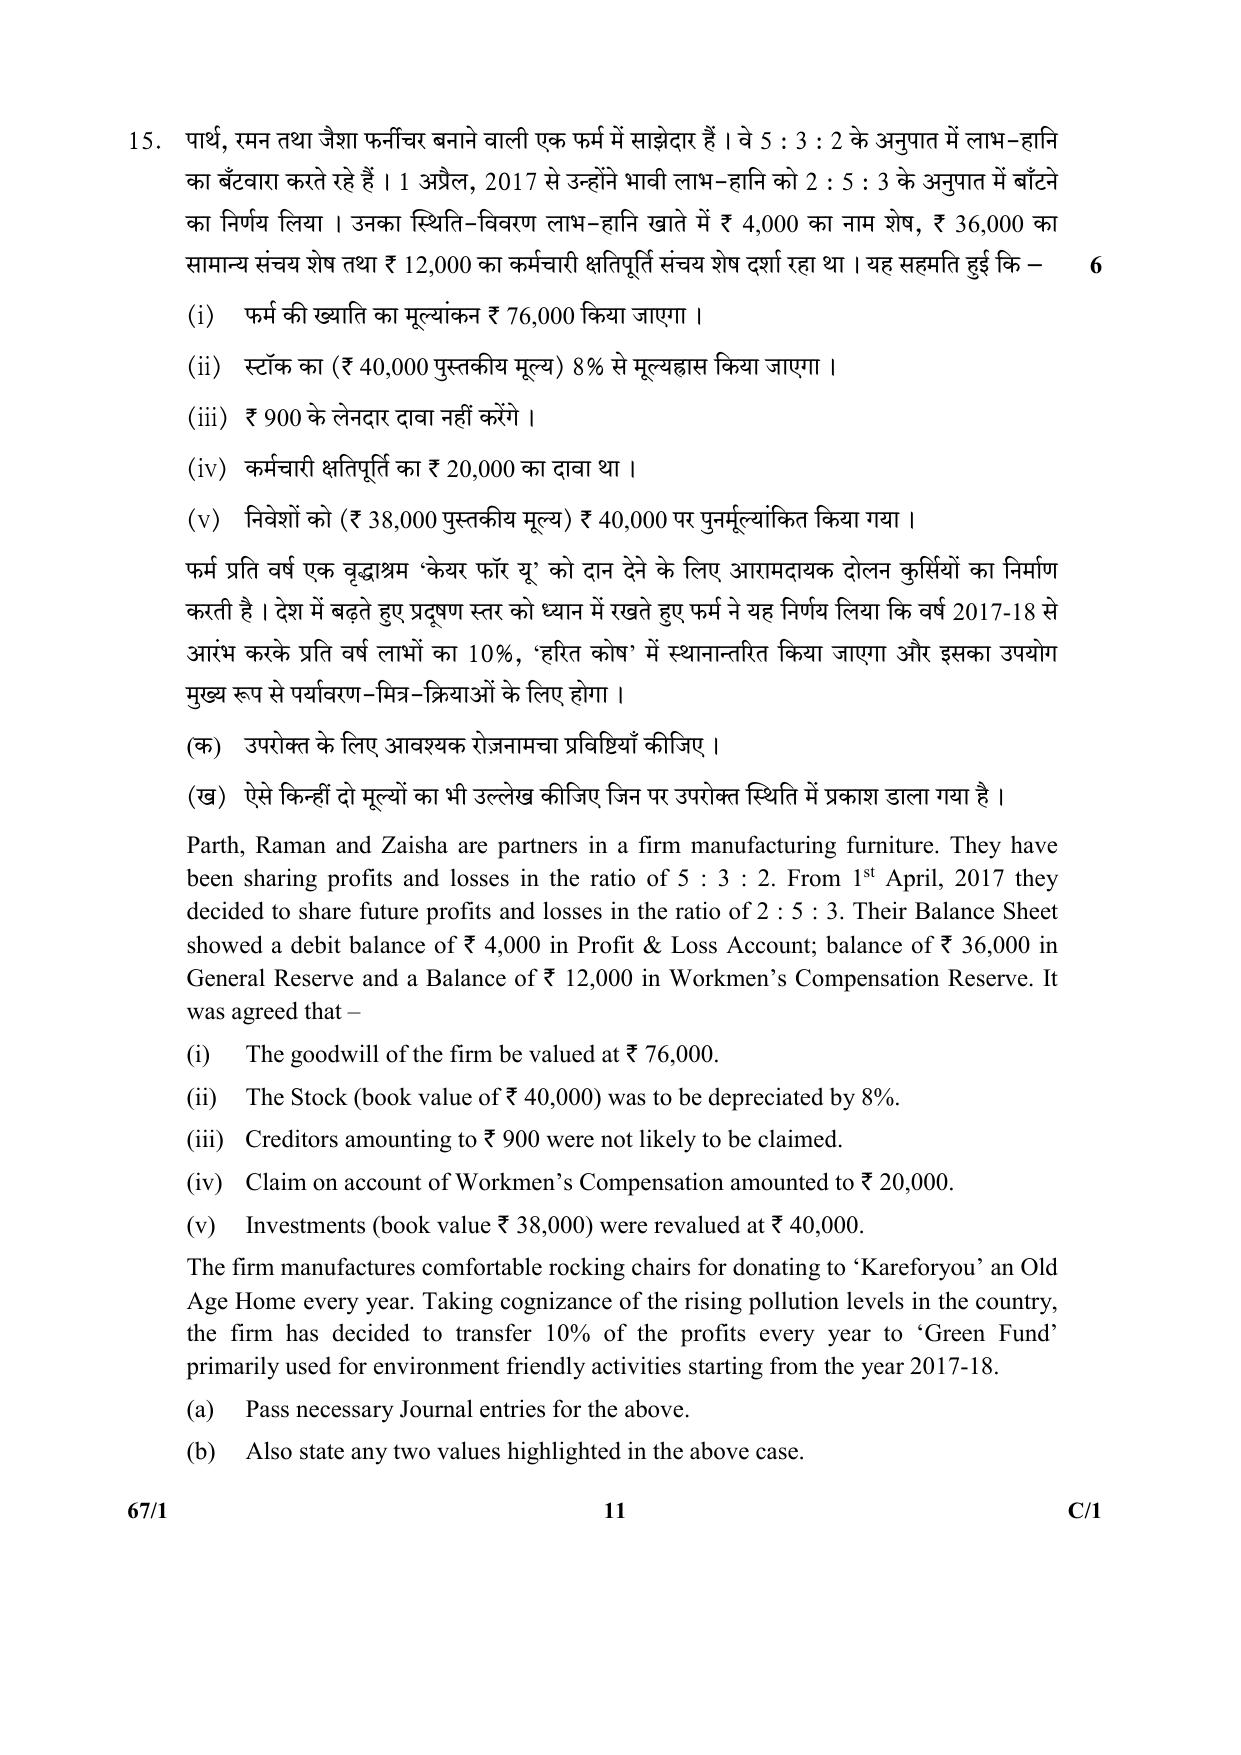 CBSE Class 12 67-1  (Accountancy) 2018 Compartment Question Paper - Page 11